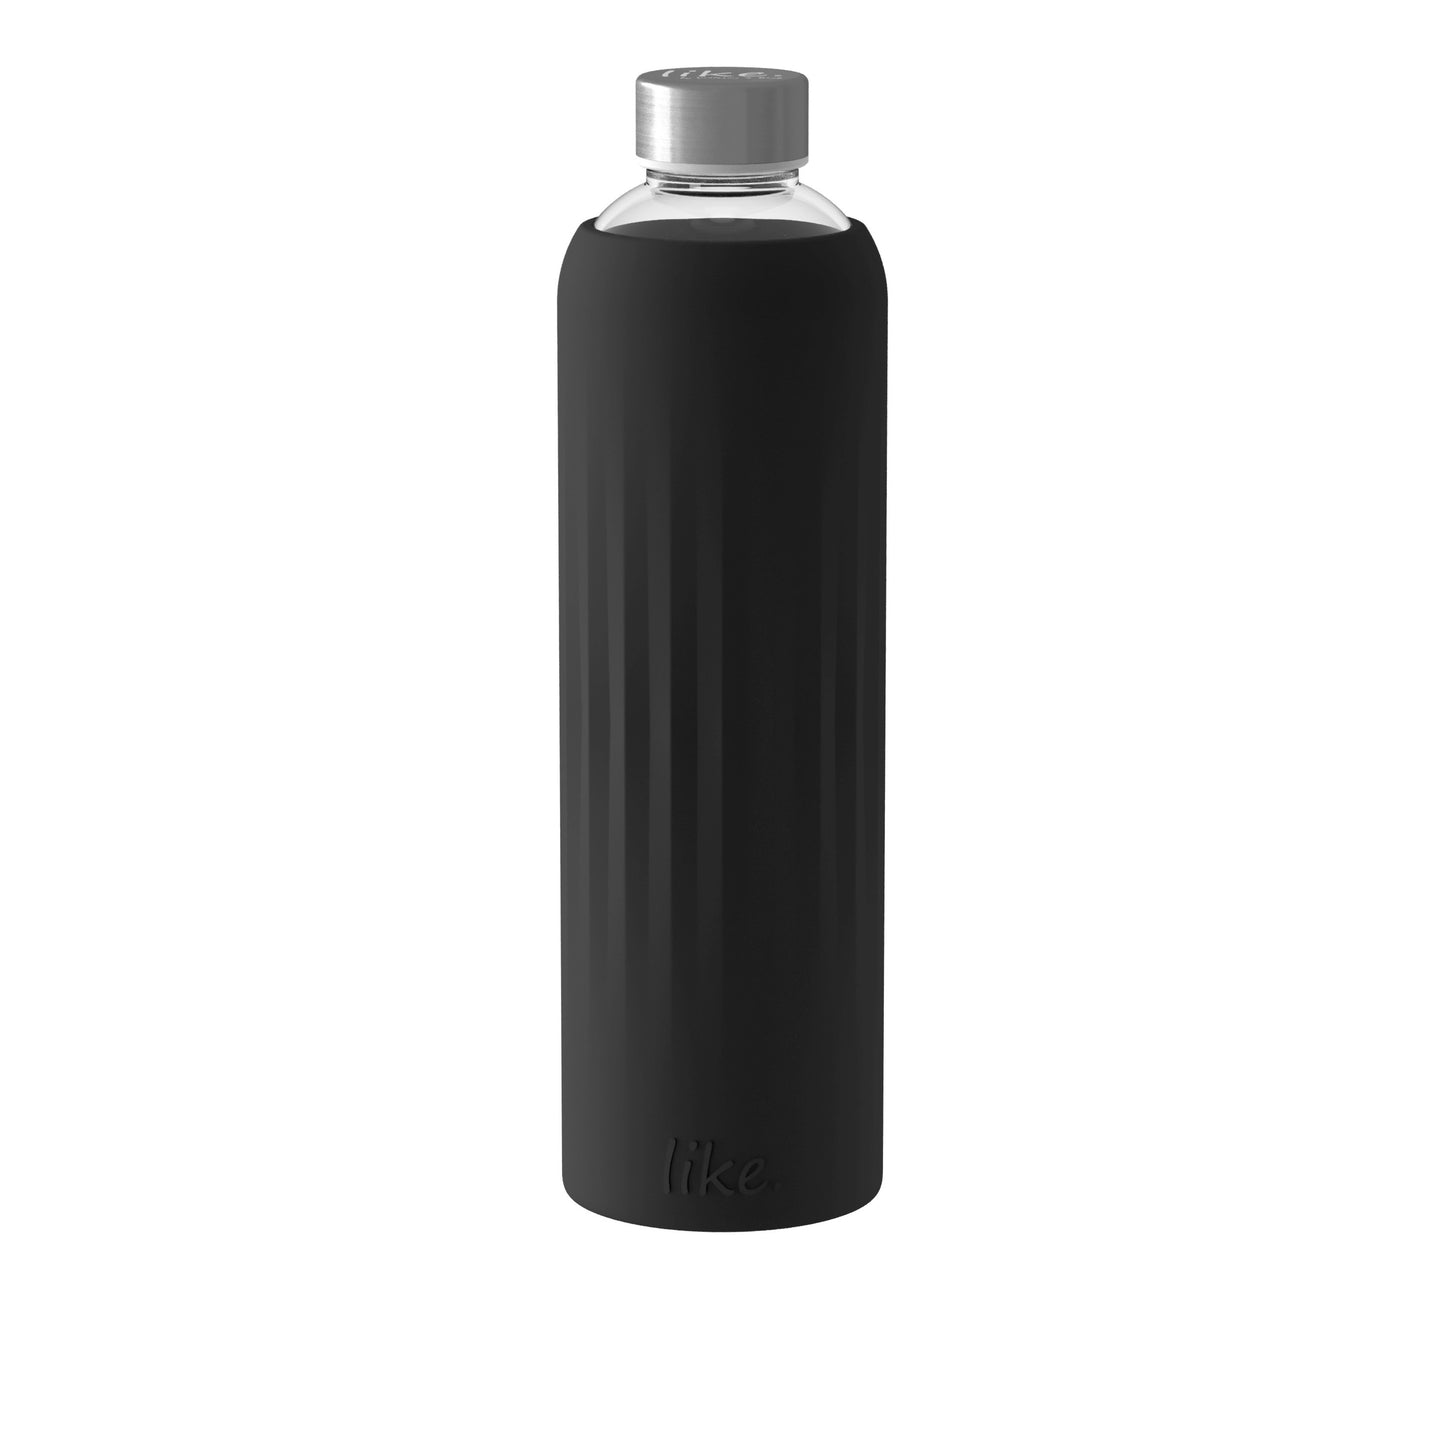 Villeroy & Boch To Go & To Stay Drinking Bottle, Black